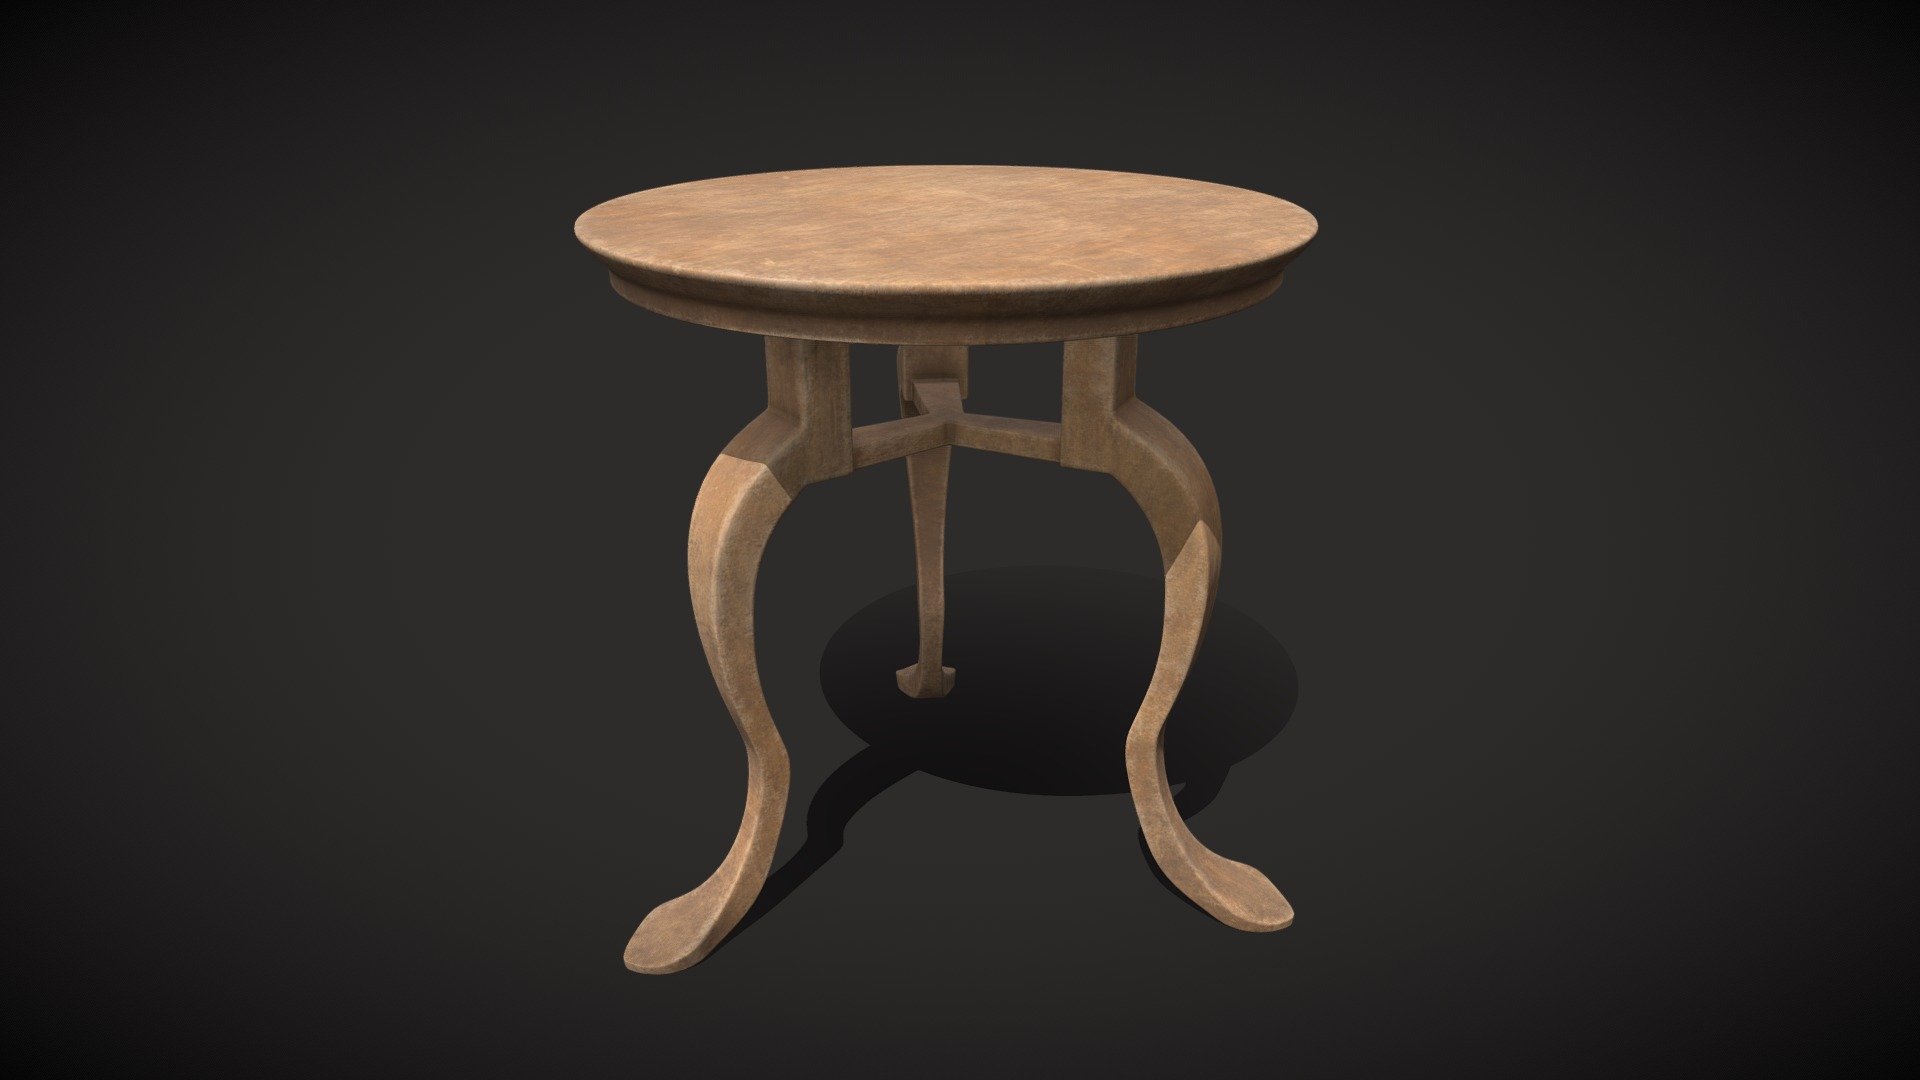 The tables in Roman times used to have one foot, although they had three, four or five legs, used as luxury furniture they could be made of stone, bronze or marble, the three-legged ones being the most common use (Mensa tripens). Those for eating were round and the square or rectangular ones were used in military camps. Citrus wood was considered appropriate for dinner tables, because the wine and sauces served did not leave it marked.
Historically accurate game ready asset modeled in Blender and high quality PBR (Diffuse/Metallic/Roughness/Normal_OpenGL) textures in Substance Painter at 4k 2k and 1k resolution and subdivision ready for different LOD implementations, at FBX and OBJ and .blend files.

LOD 00
Vertex 20354
Faces 20350

LOD 01
Vertex 5090
Faces 5089

References
https://www.youtube.com/watch?v=Xwff6XfPOIU
https://www.ilmattino.it/napoli/cultura/pompei_come_duemila_anni_fa_arredi_ricostruiti_nelle_domus-1888961.html
https://gladiatrixenlaarena.blogspot.com/2016/08/mobiliario-romano.html - Roman table - Mensa tripens - Buy Royalty Free 3D model by XYZ 3Dassets (@XYZ3Dassets) 3d model